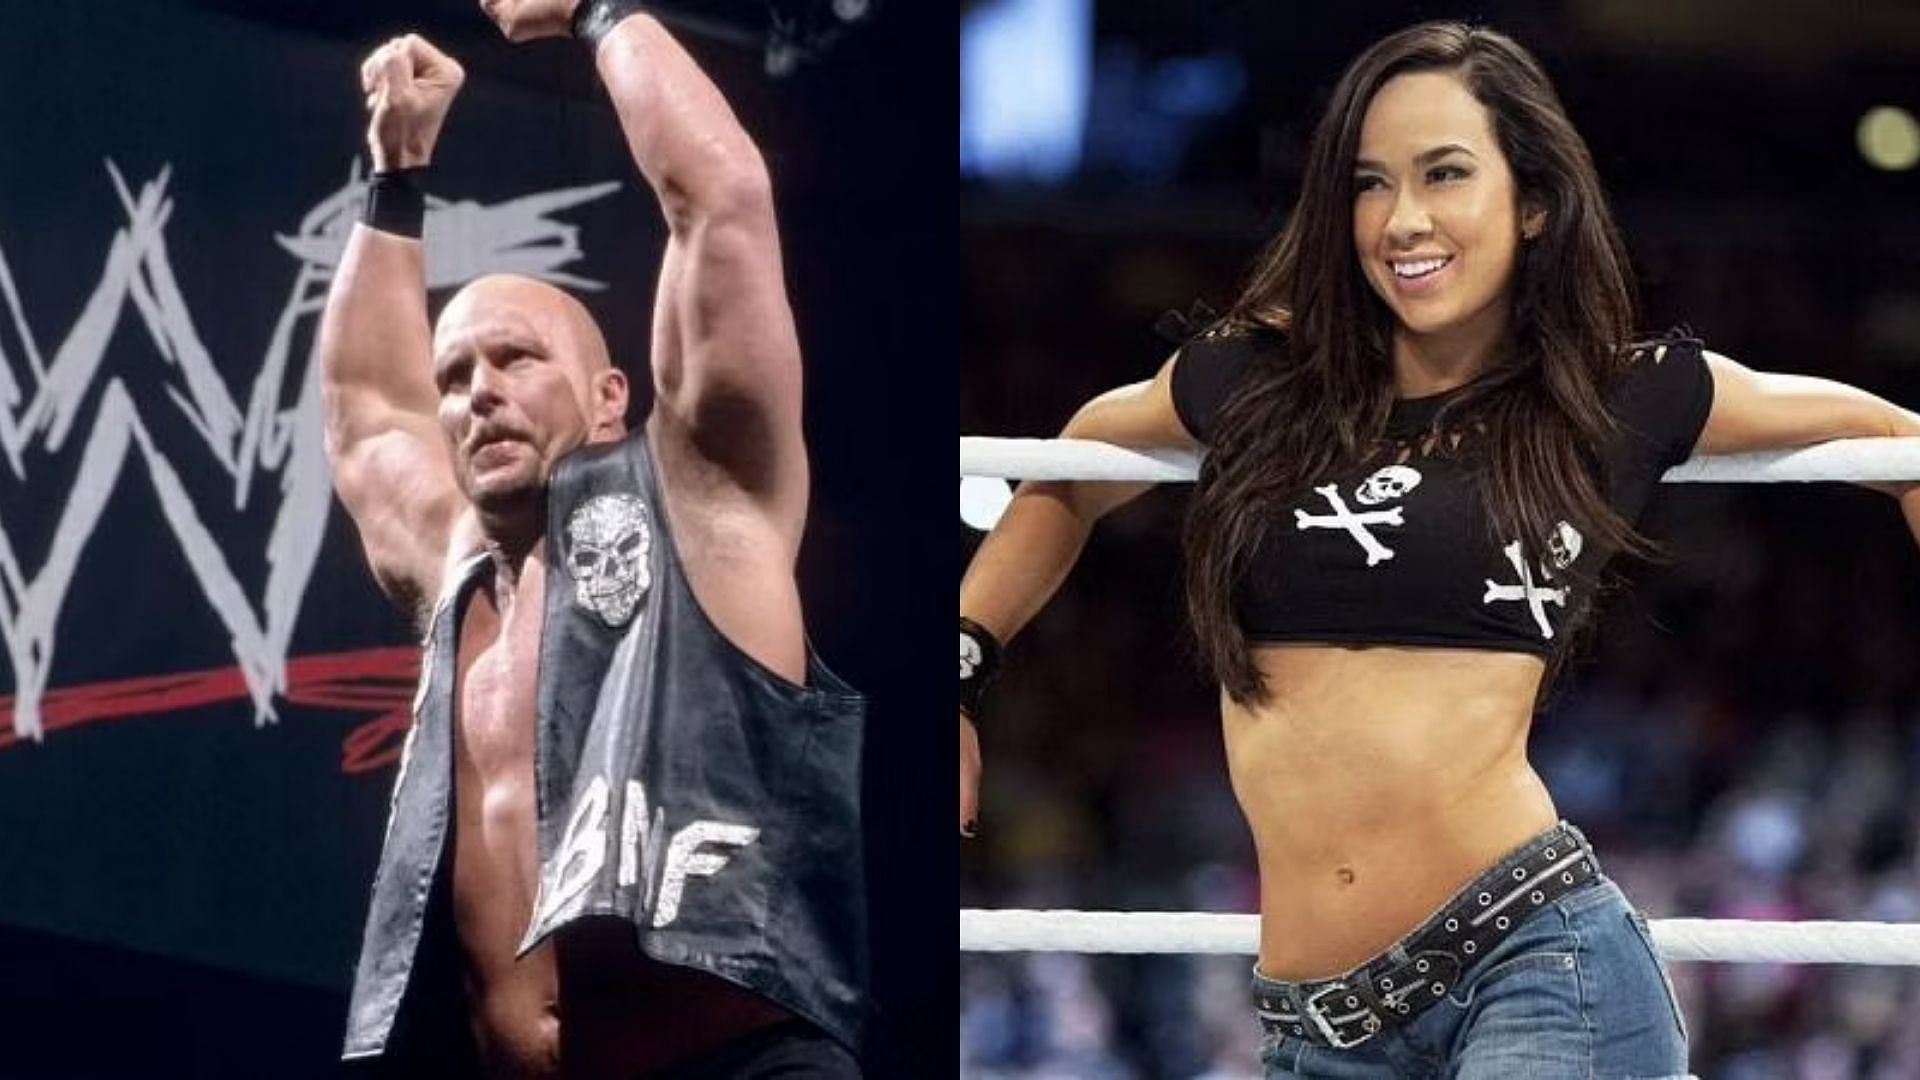 Many superstars have sadly retired before their peak years